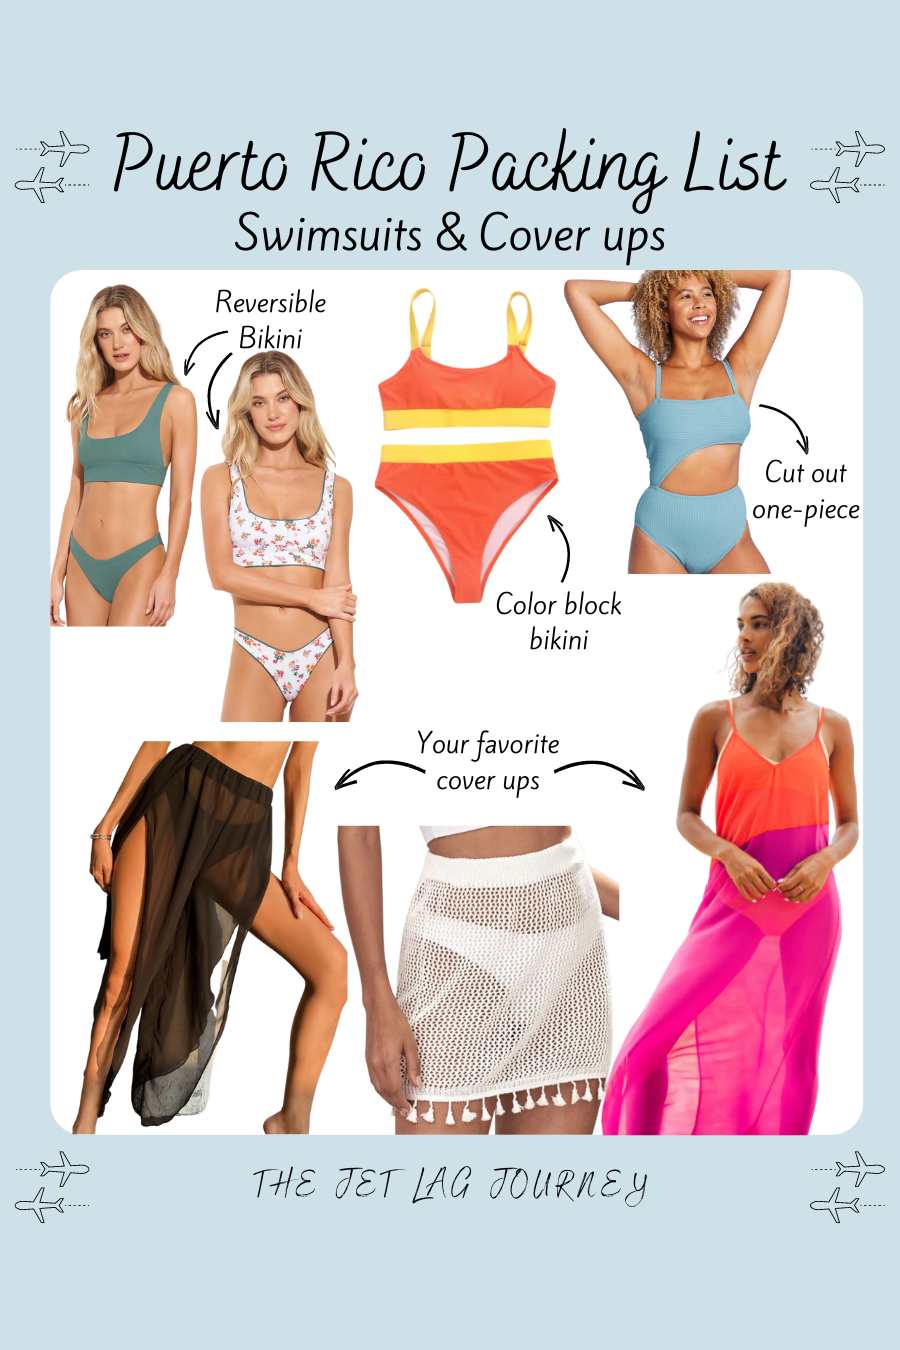 Puerto Rico Packing List Swimsuits and Cover ups